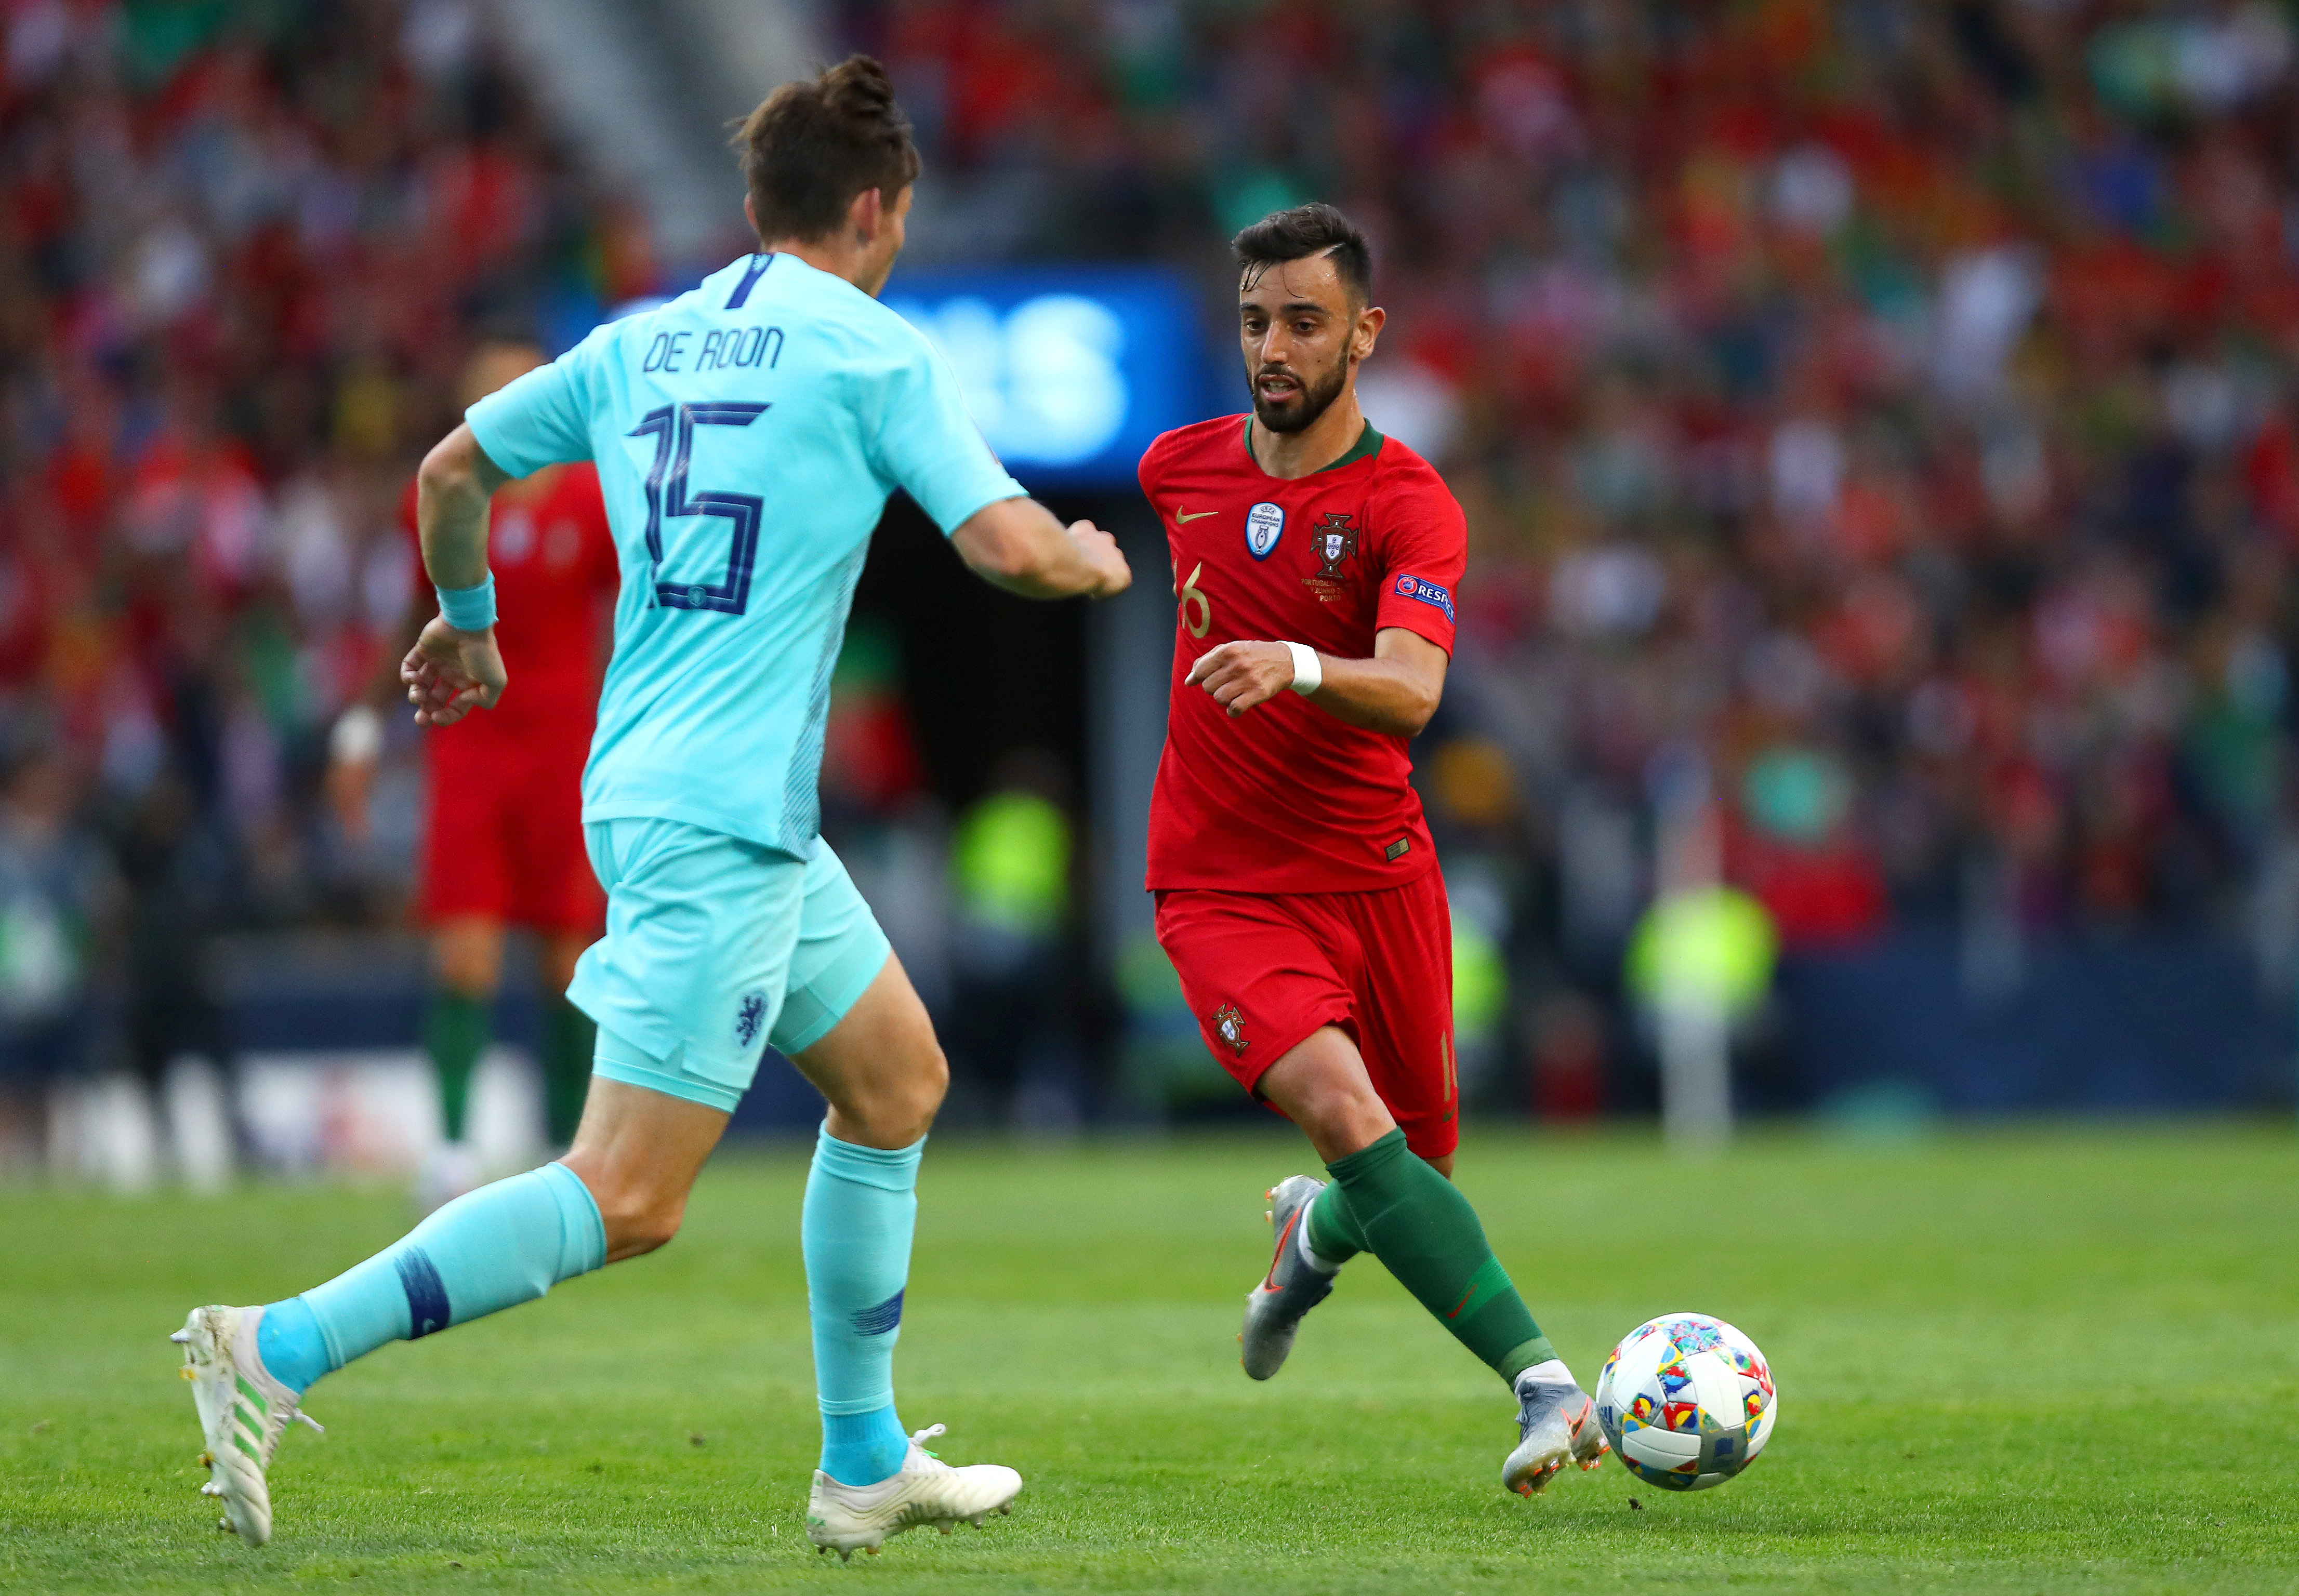 PORTO, PORTUGAL - JUNE 09: Bruno Fernandes of Portugal takes on Marten de Roon of the Netherlands during the UEFA Nations League Final between Portugal and the Netherlands at Estadio do Dragao on June 09, 2019 in Porto, Portugal. (Photo by Dean Mouhtaropoulos/Getty Images)